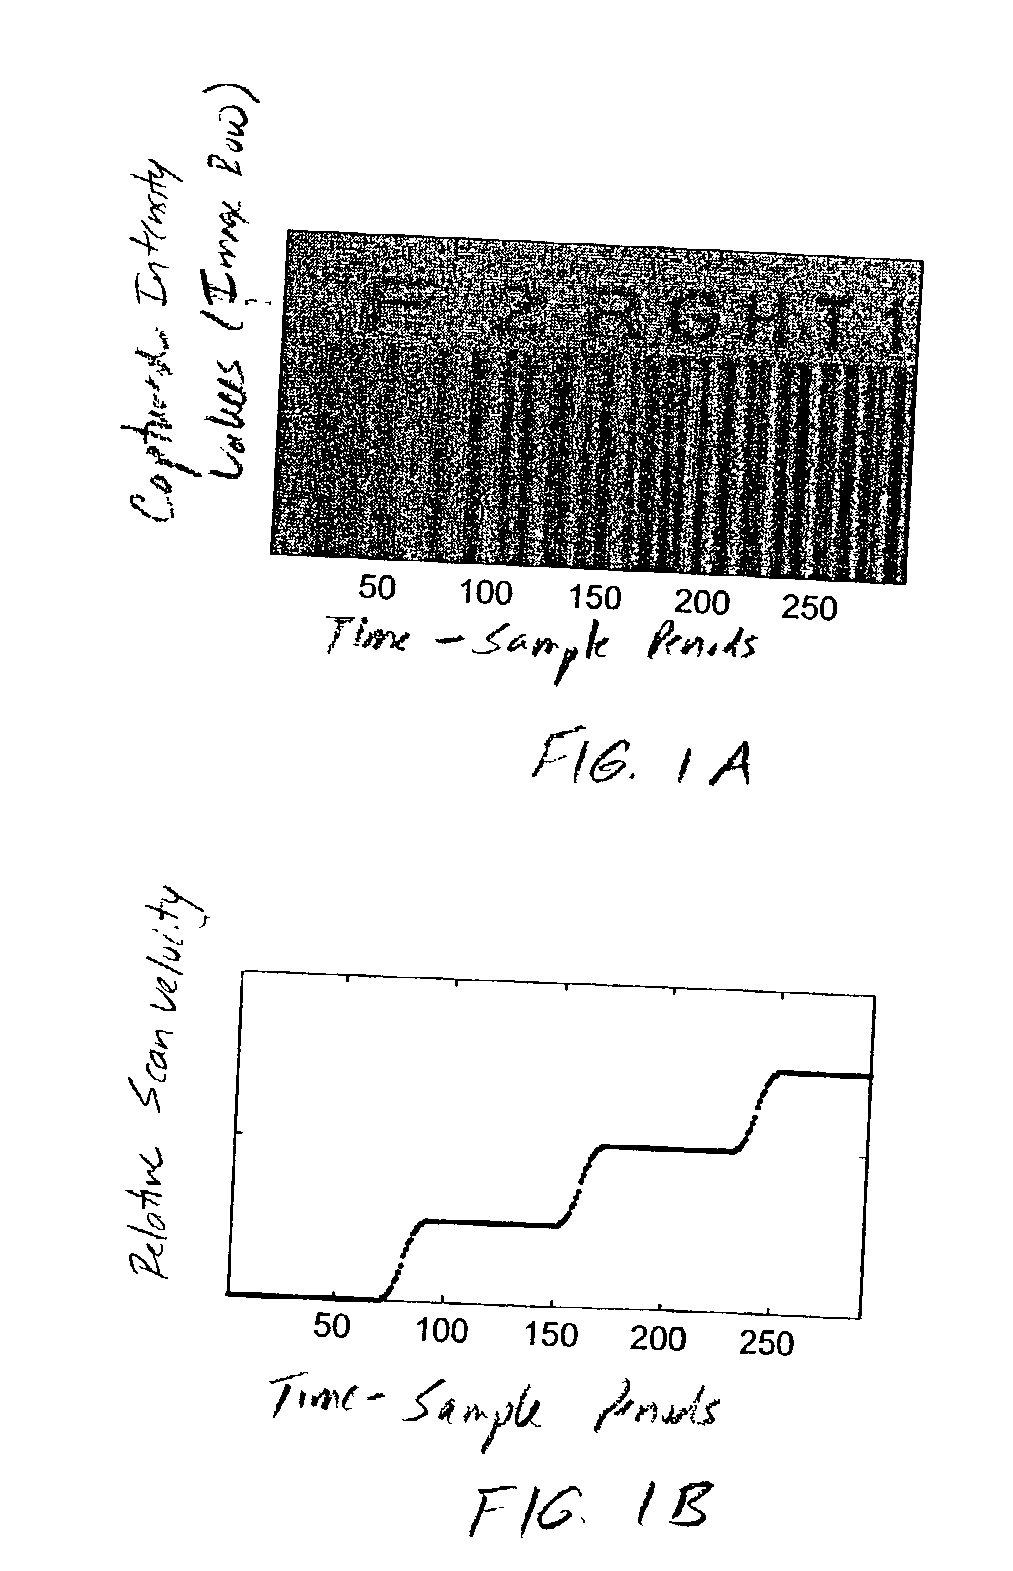 Handheld imaging device employing planar light illumination and linear imaging with image-based velocity detection and aspect ratio compensation